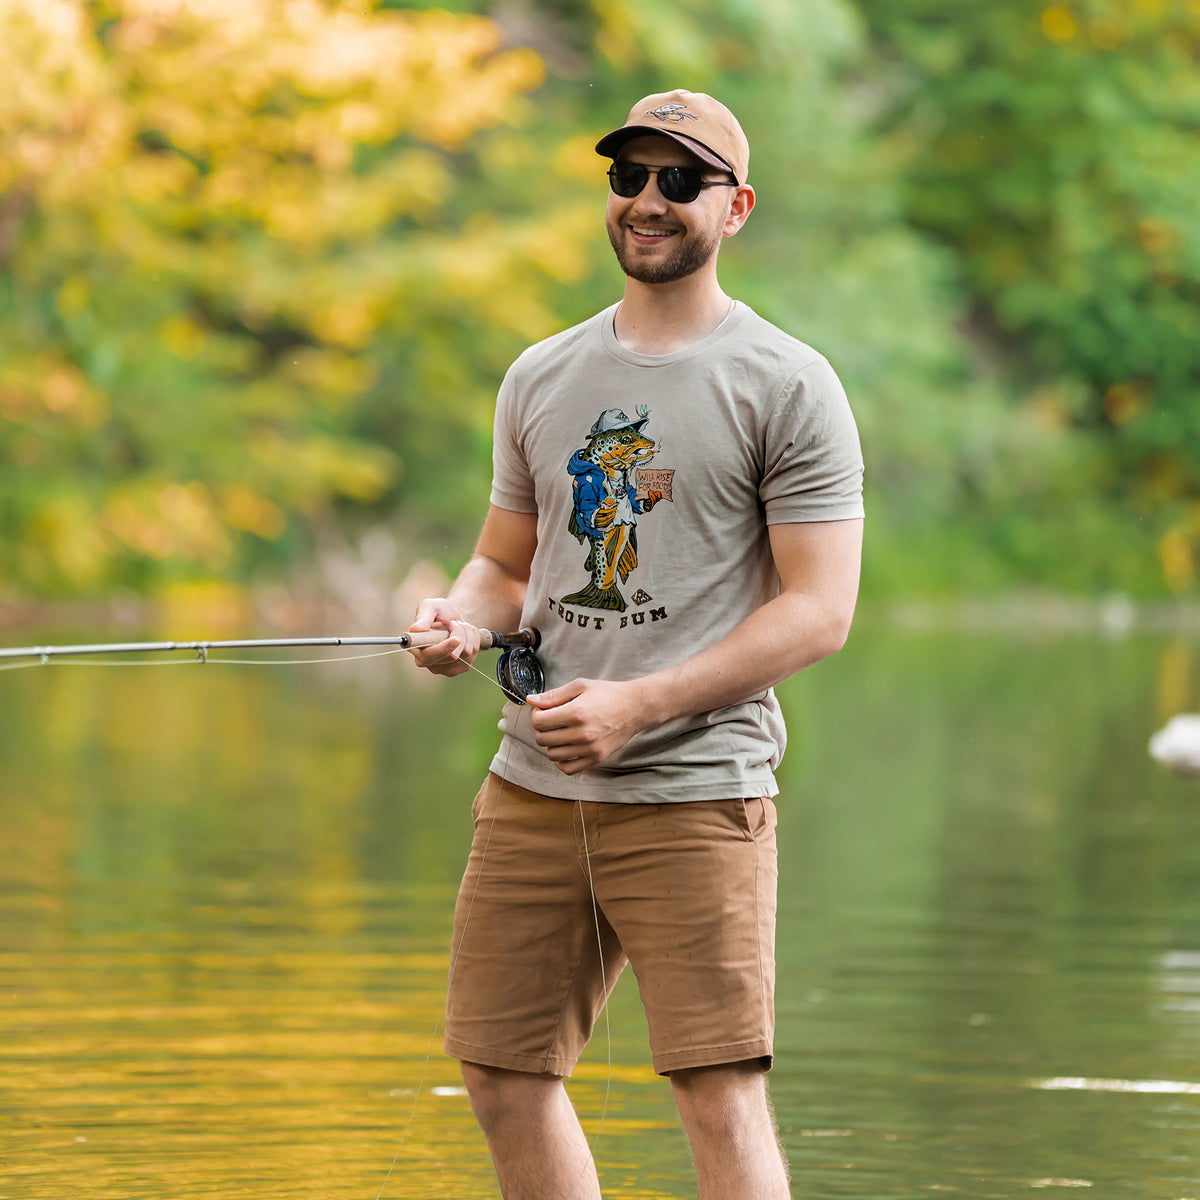 Brown Trout T-Shirt